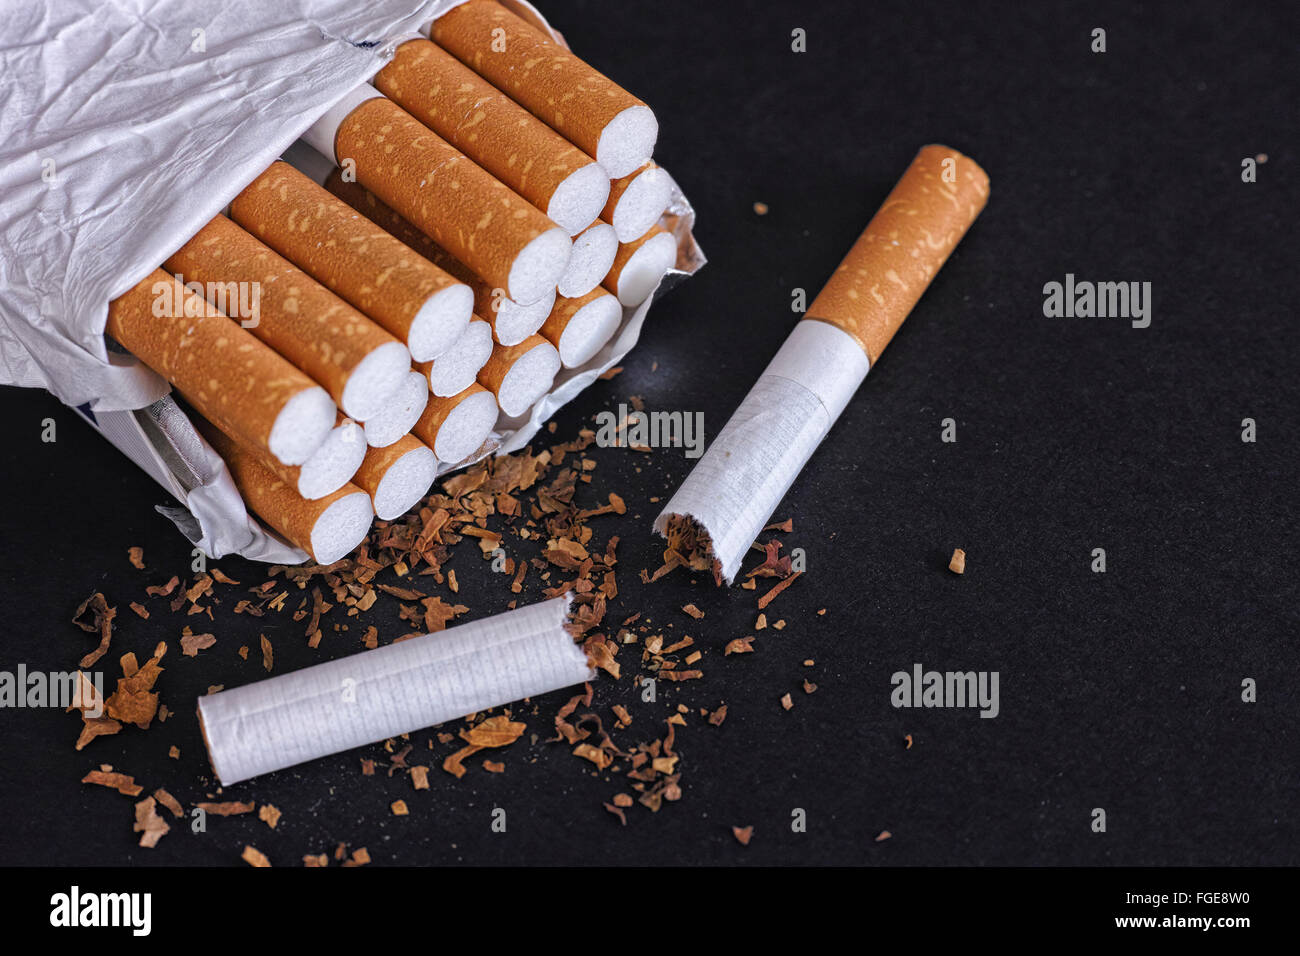 Open cigarette pack and one broken cigarette. Black background. Close up. Stock Photo